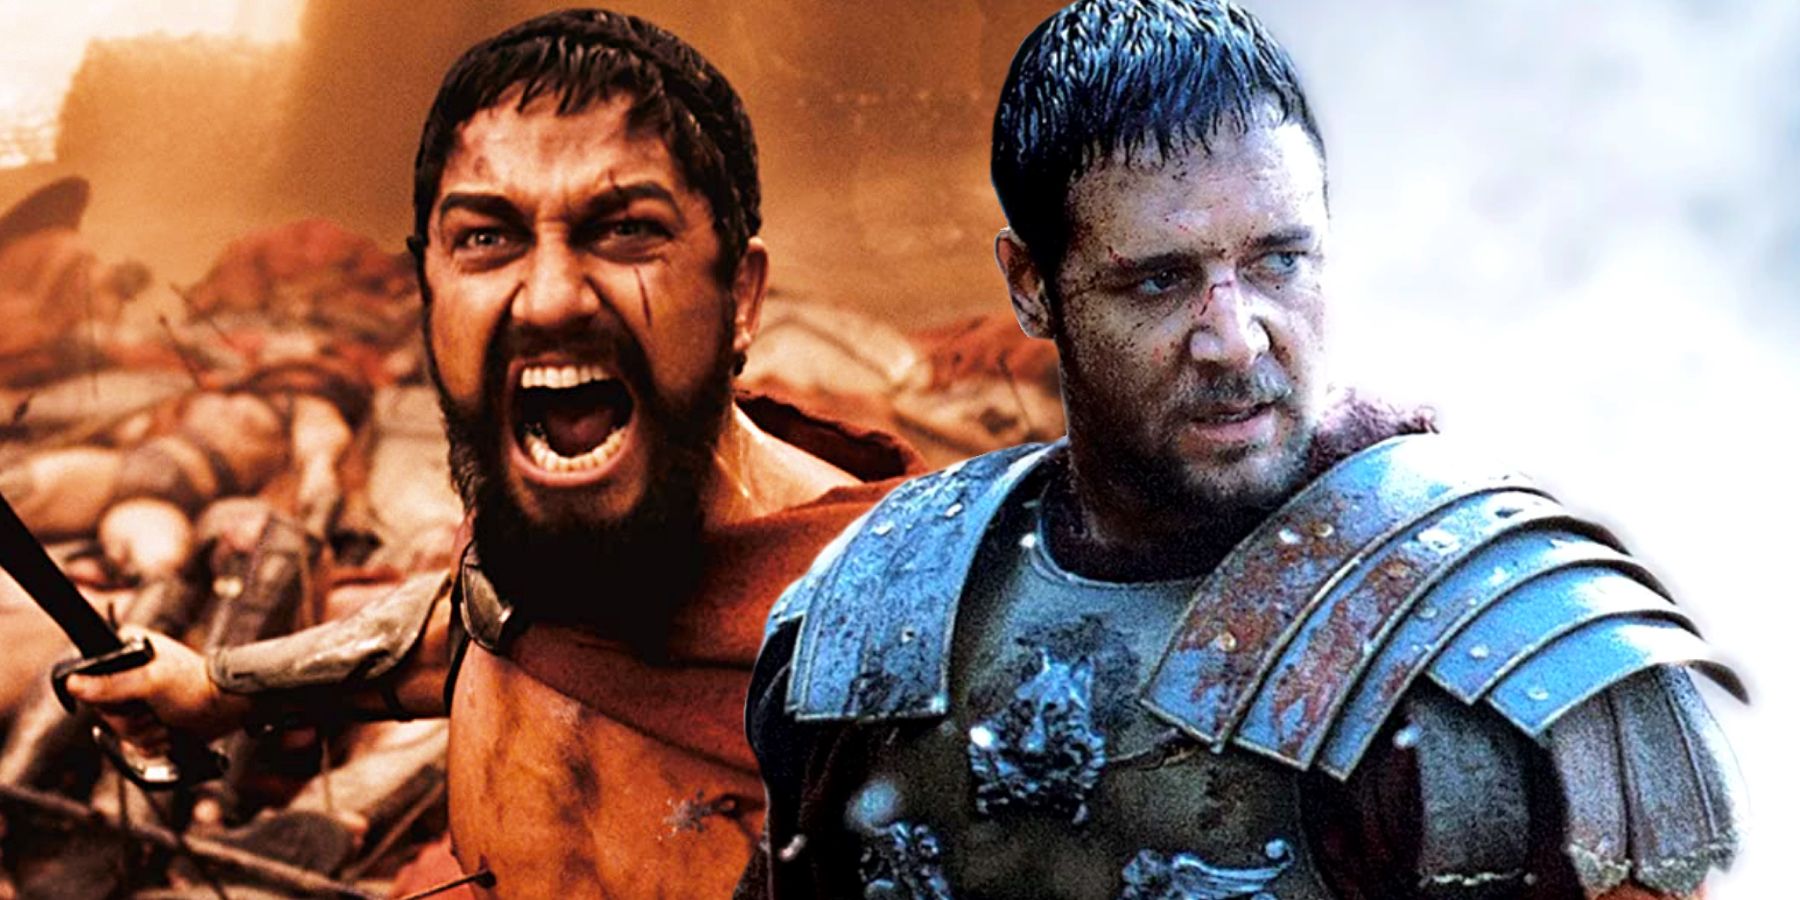 Gerard Butler in 300 with Russell Crowe in Gladiator